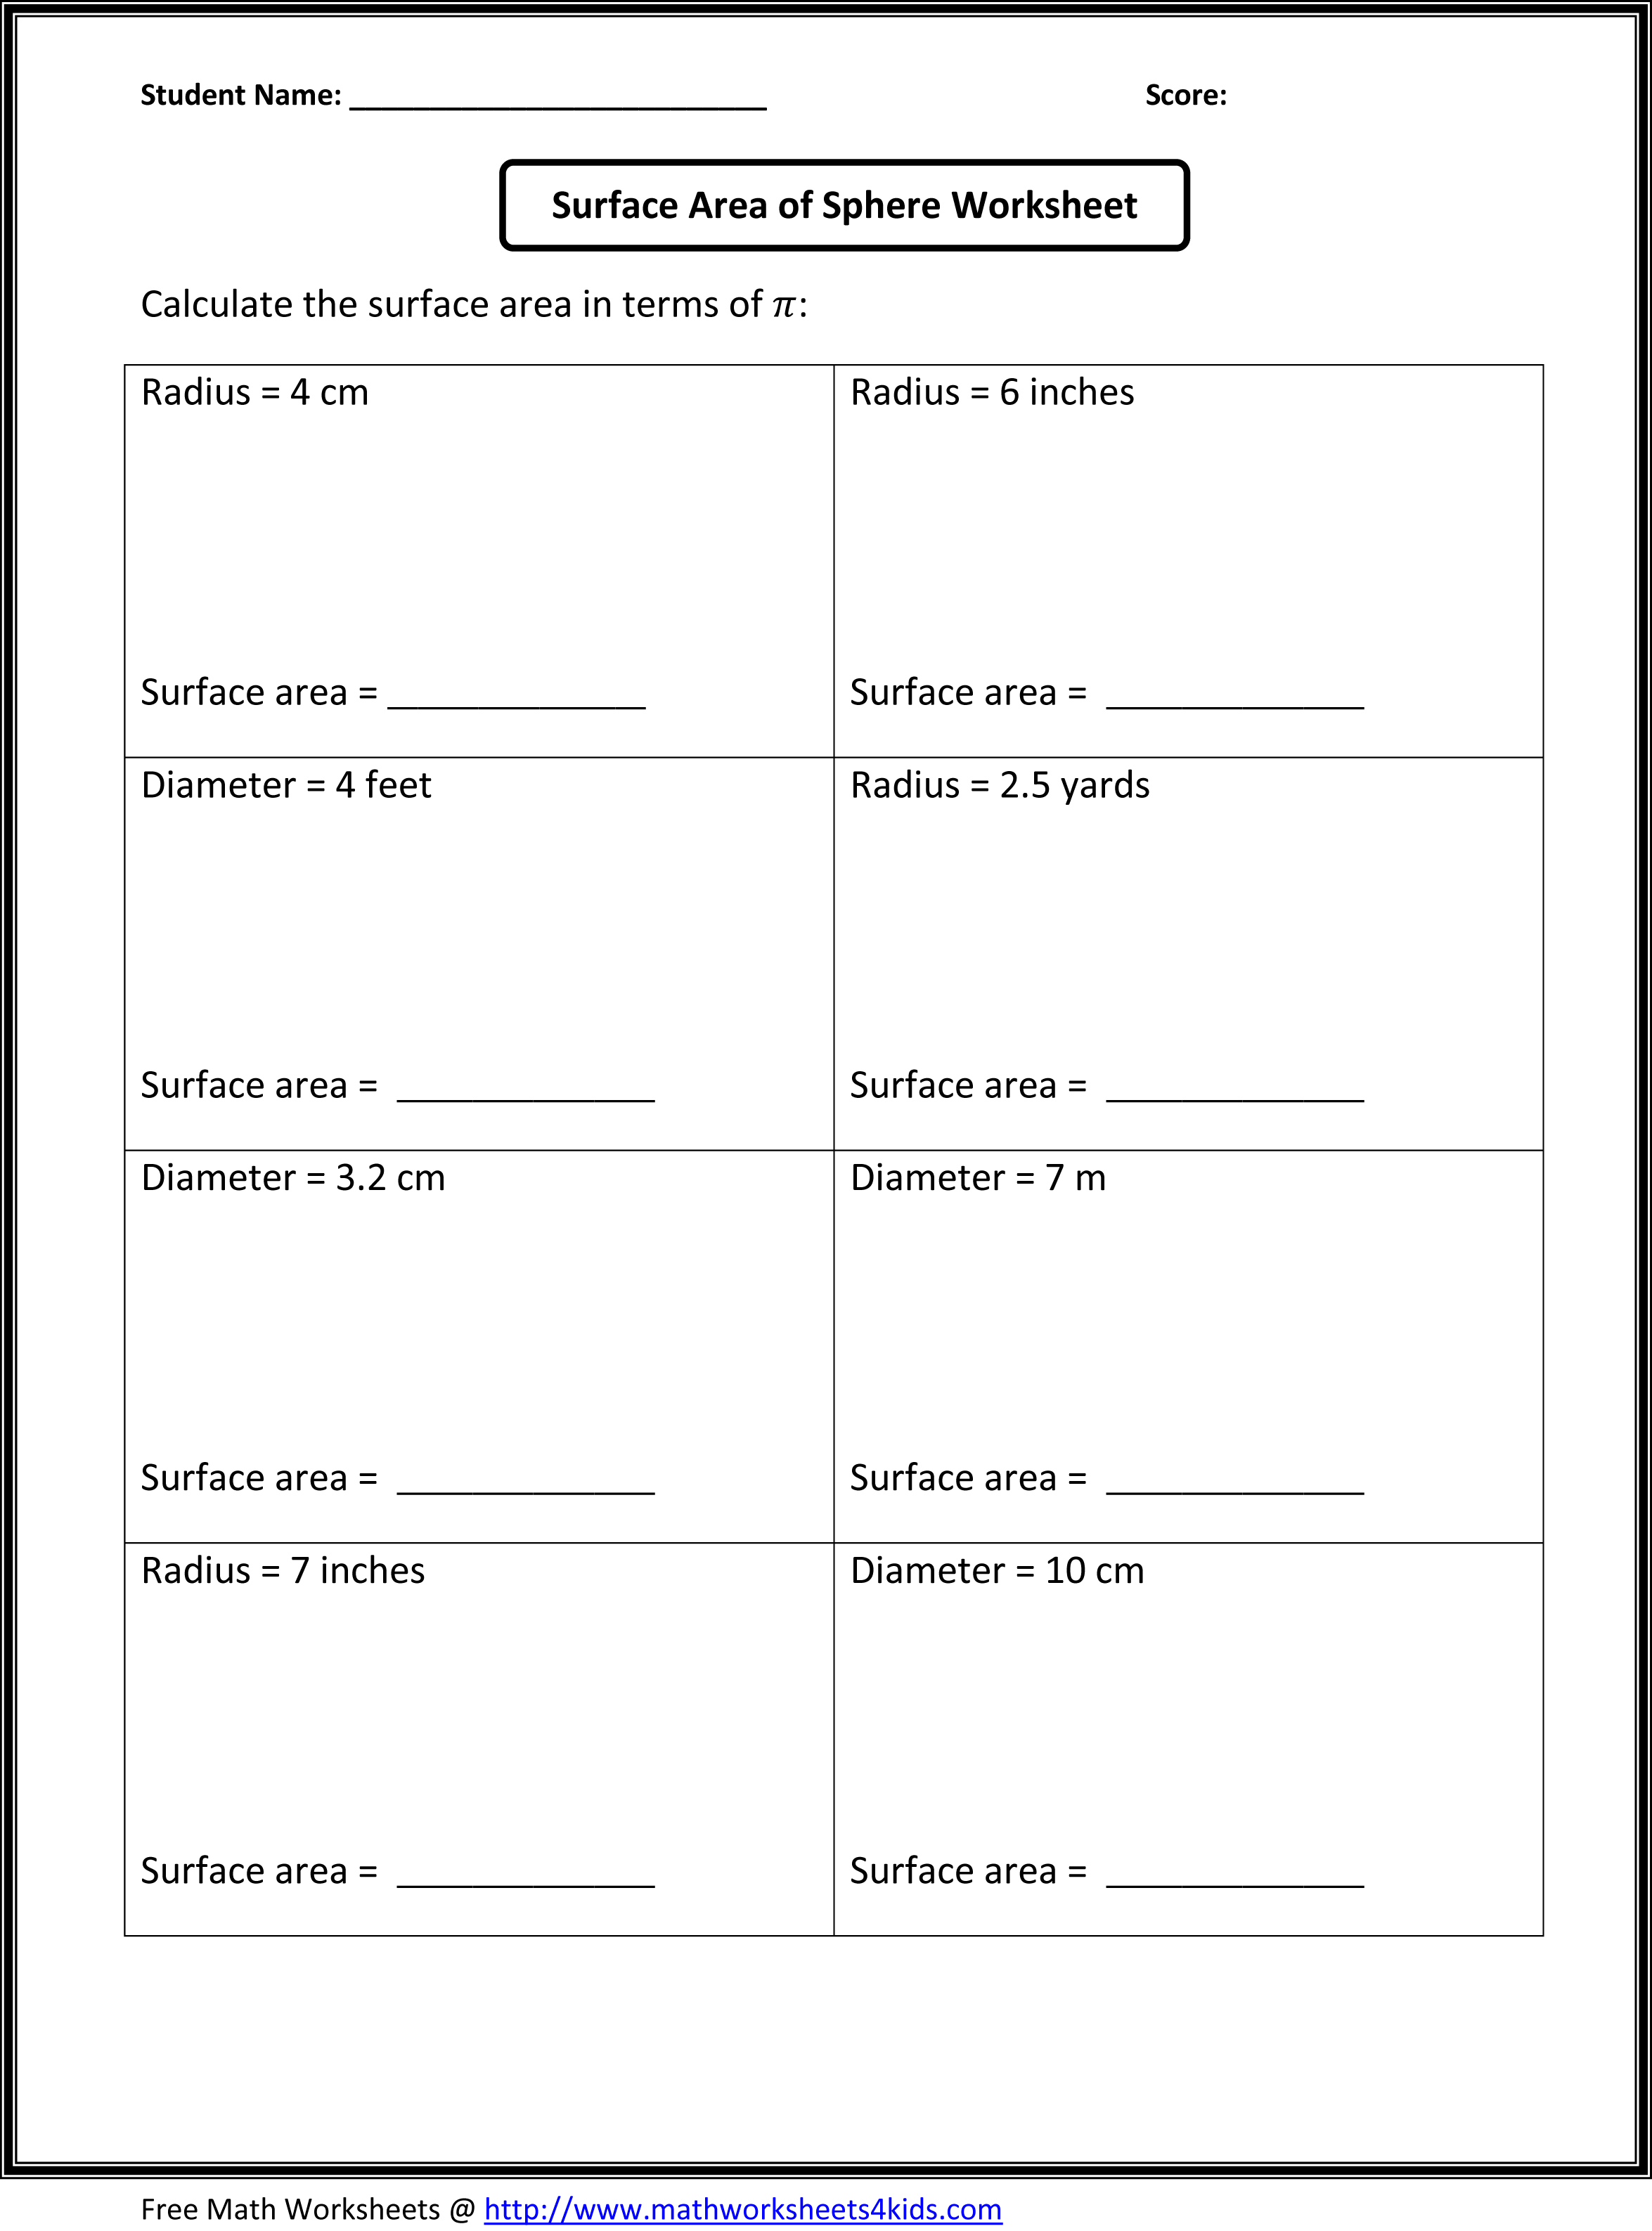 16-best-images-of-order-of-operations-and-exponents-worksheet-exponents-worksheets-order-of